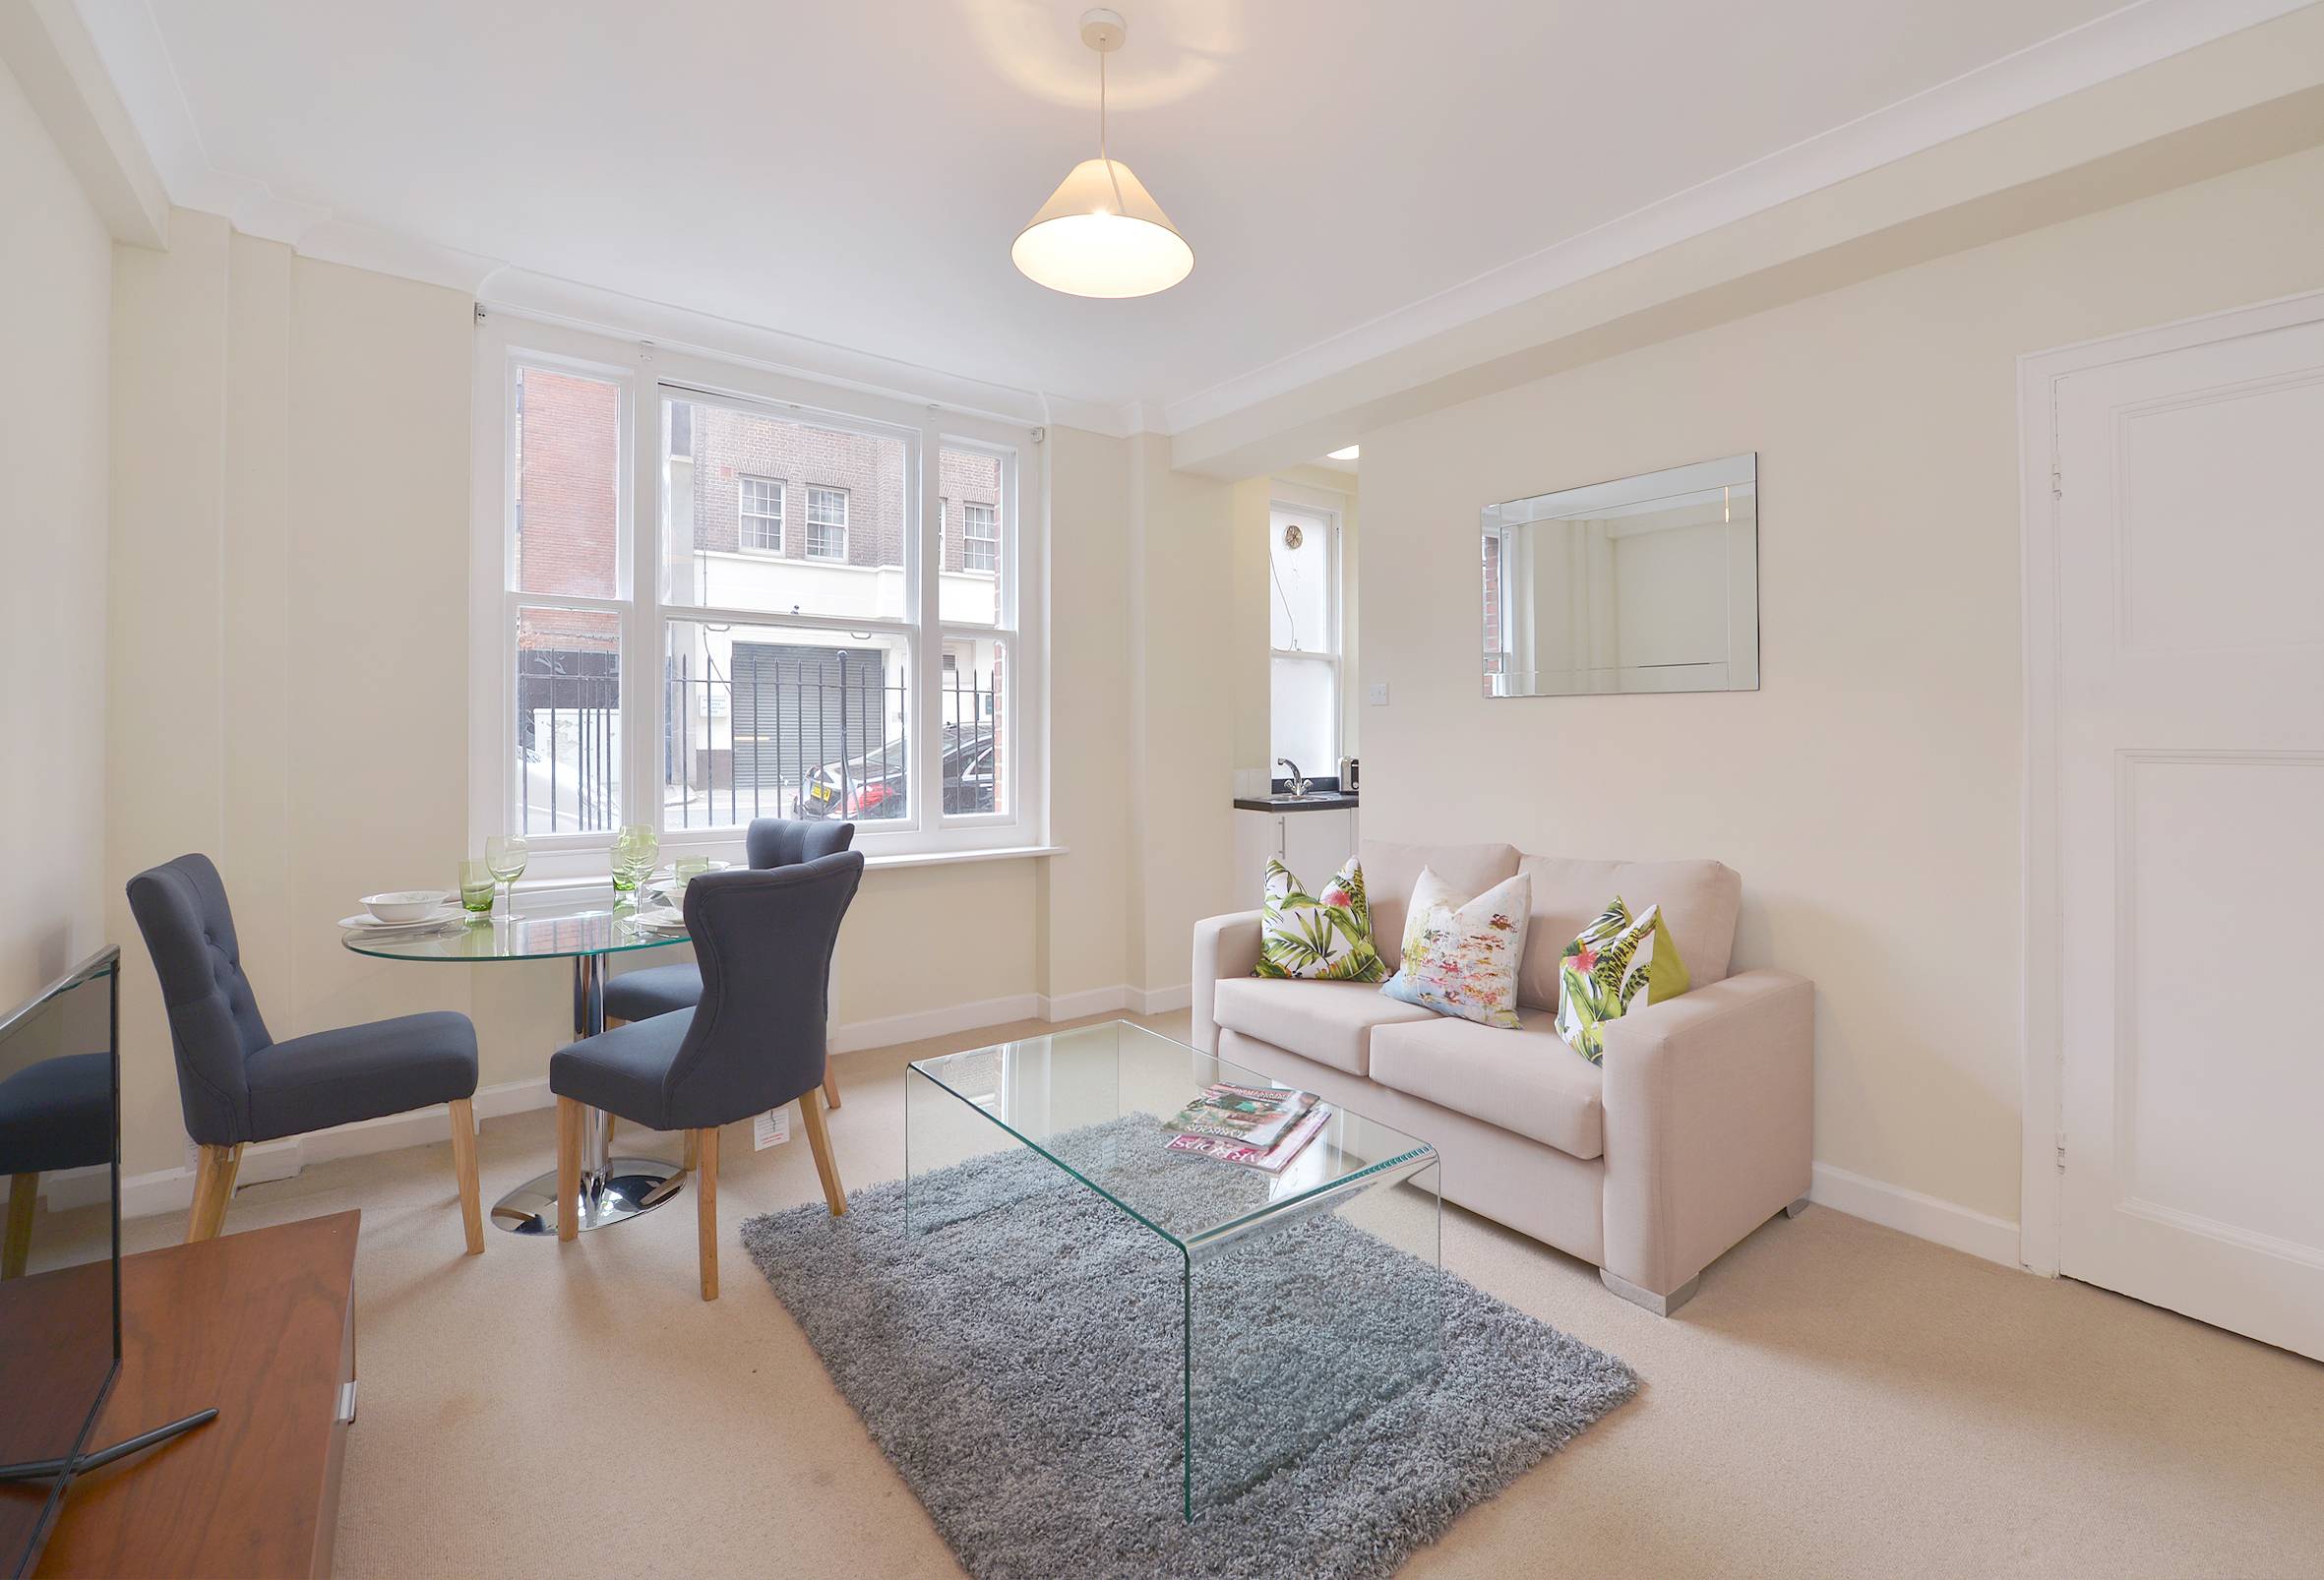 Large one bedroom apartment Mayfair, furnished or unfurnished.